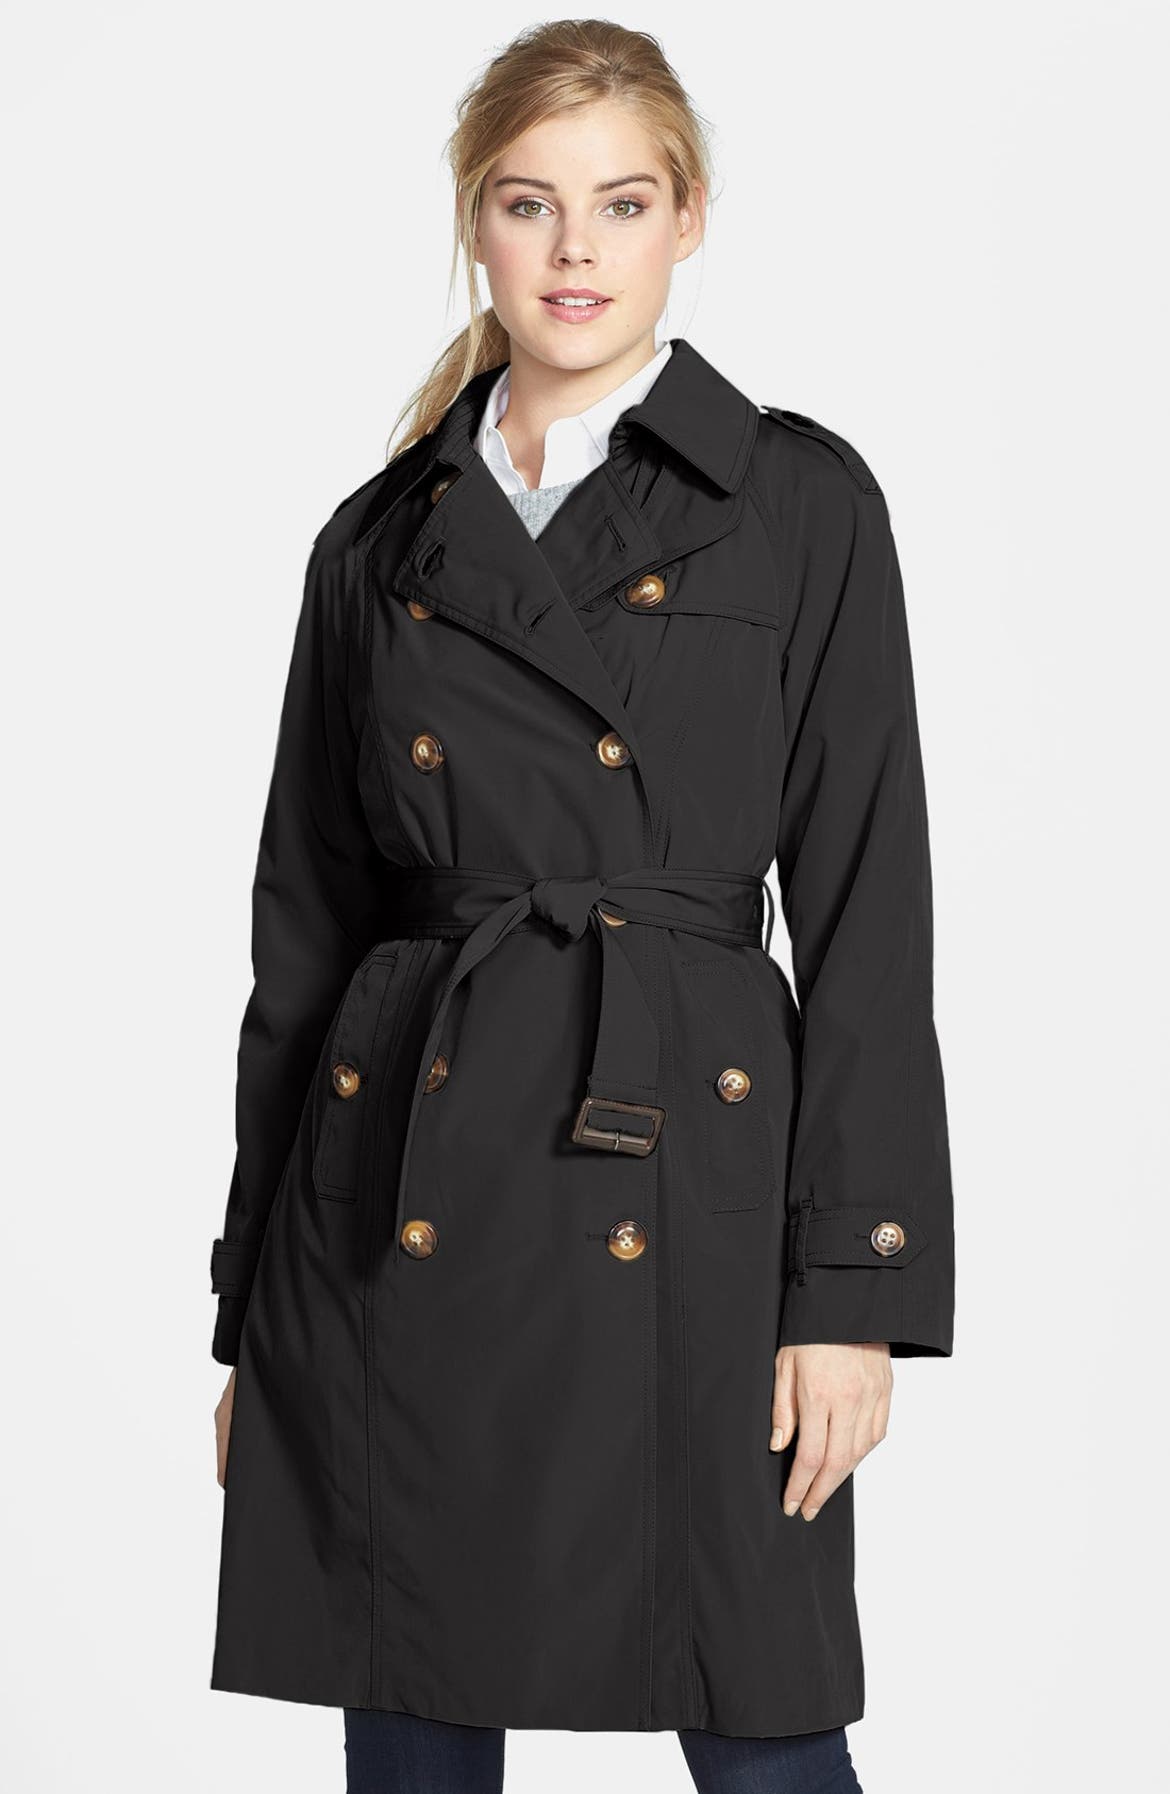 London Fog Double Breasted Trench Coat with Detachable Liner | Nordstrom